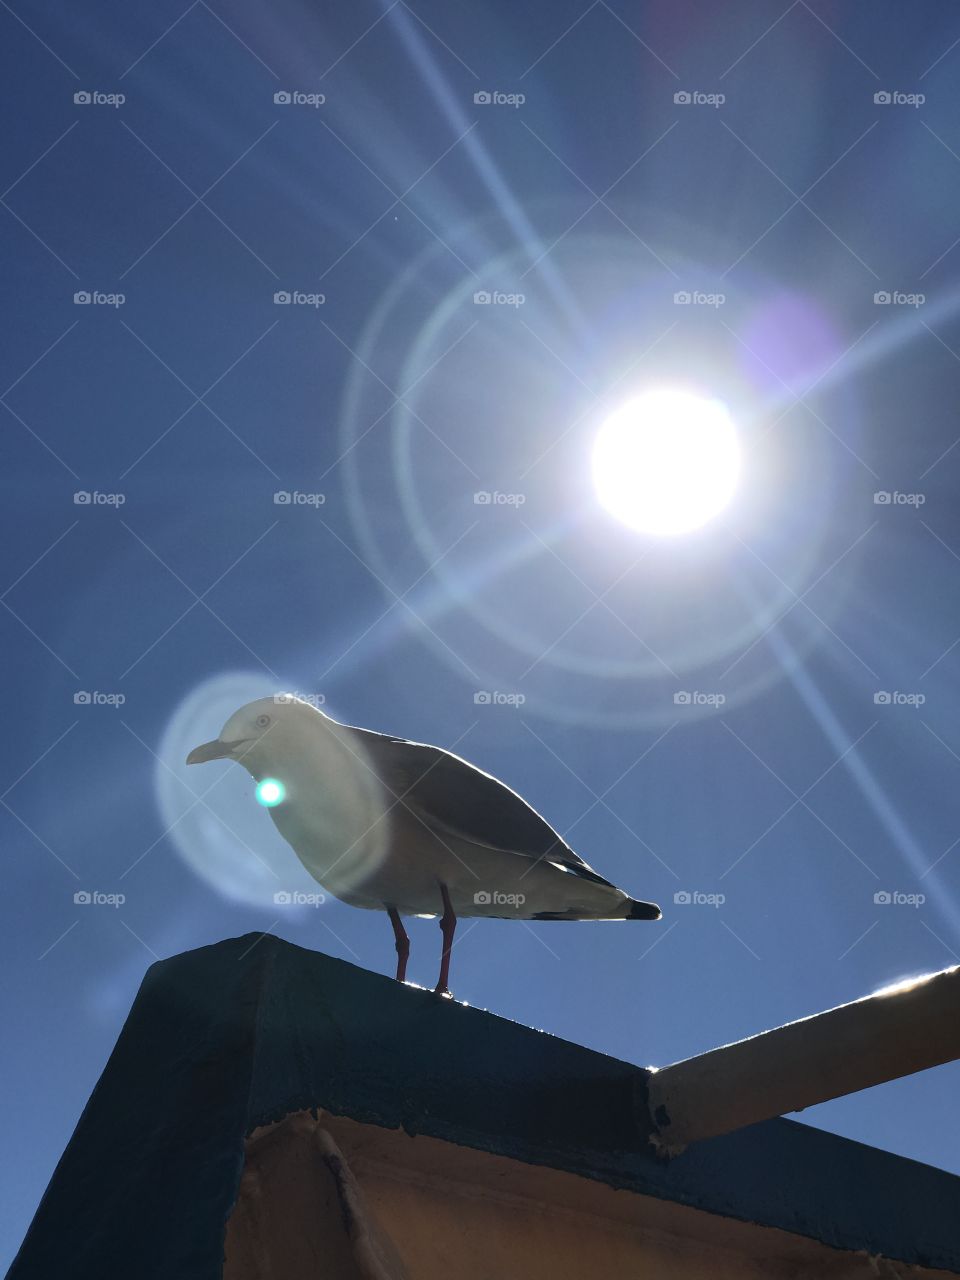 A Seagull in the sunlight